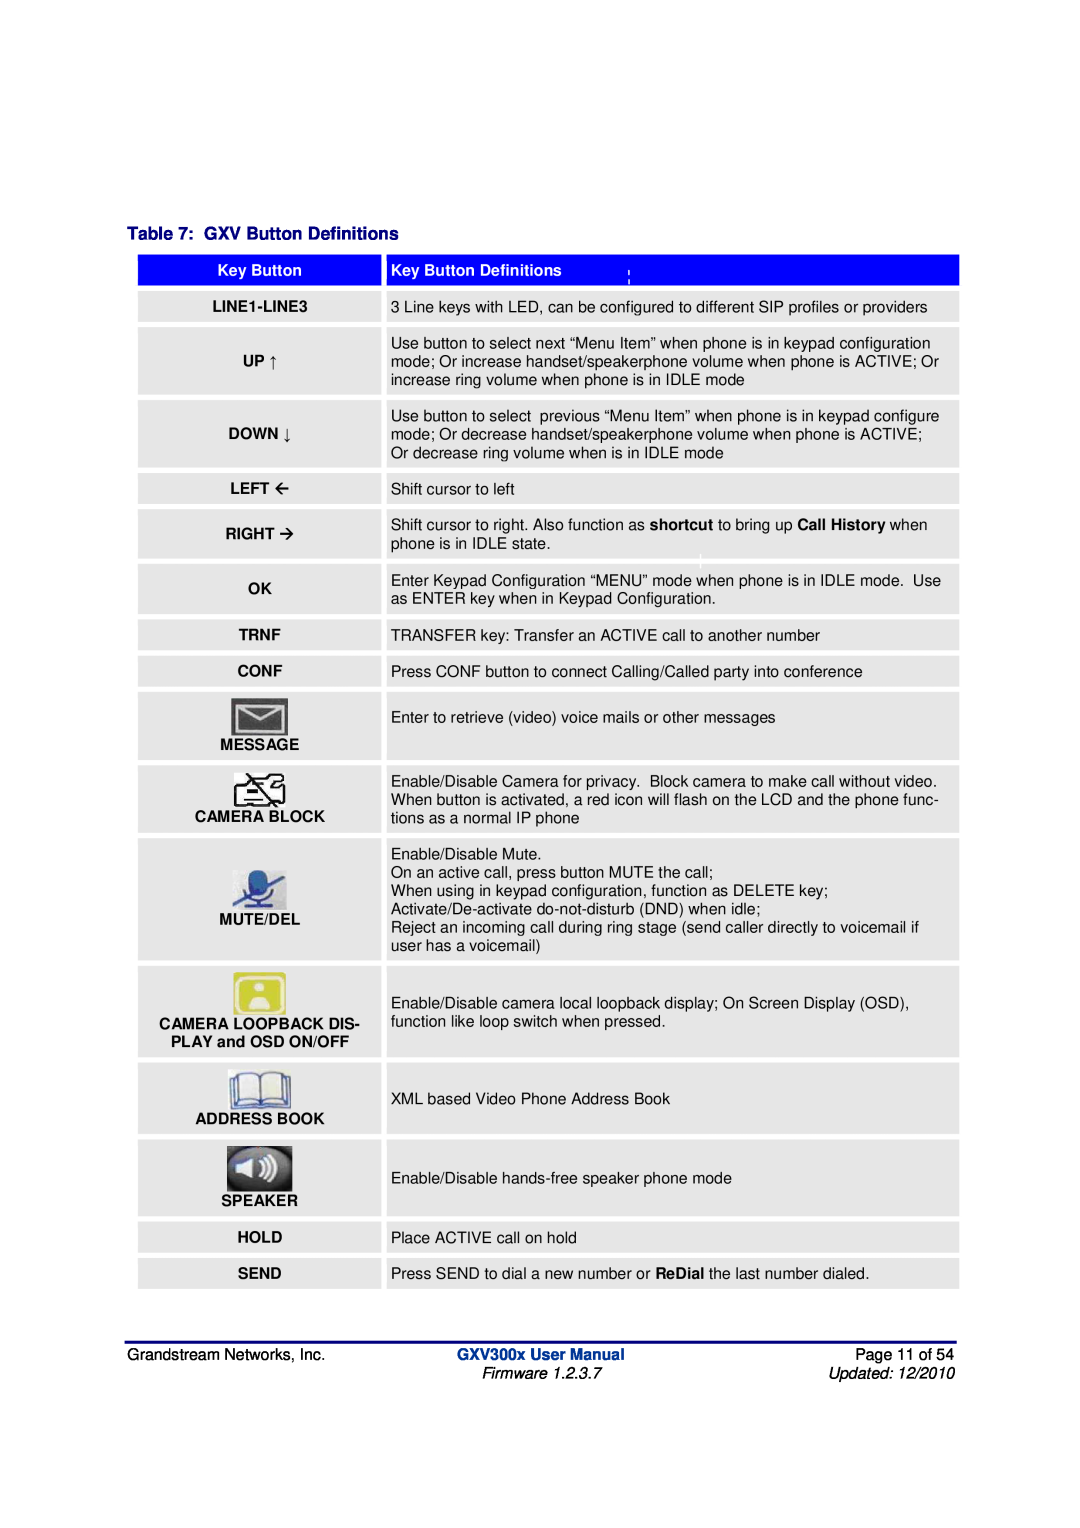 Grandstream Networks GXV300X GXV Button Definitions, Key Button Definitions, Grandstream Networks, Inc, Page 11 of 